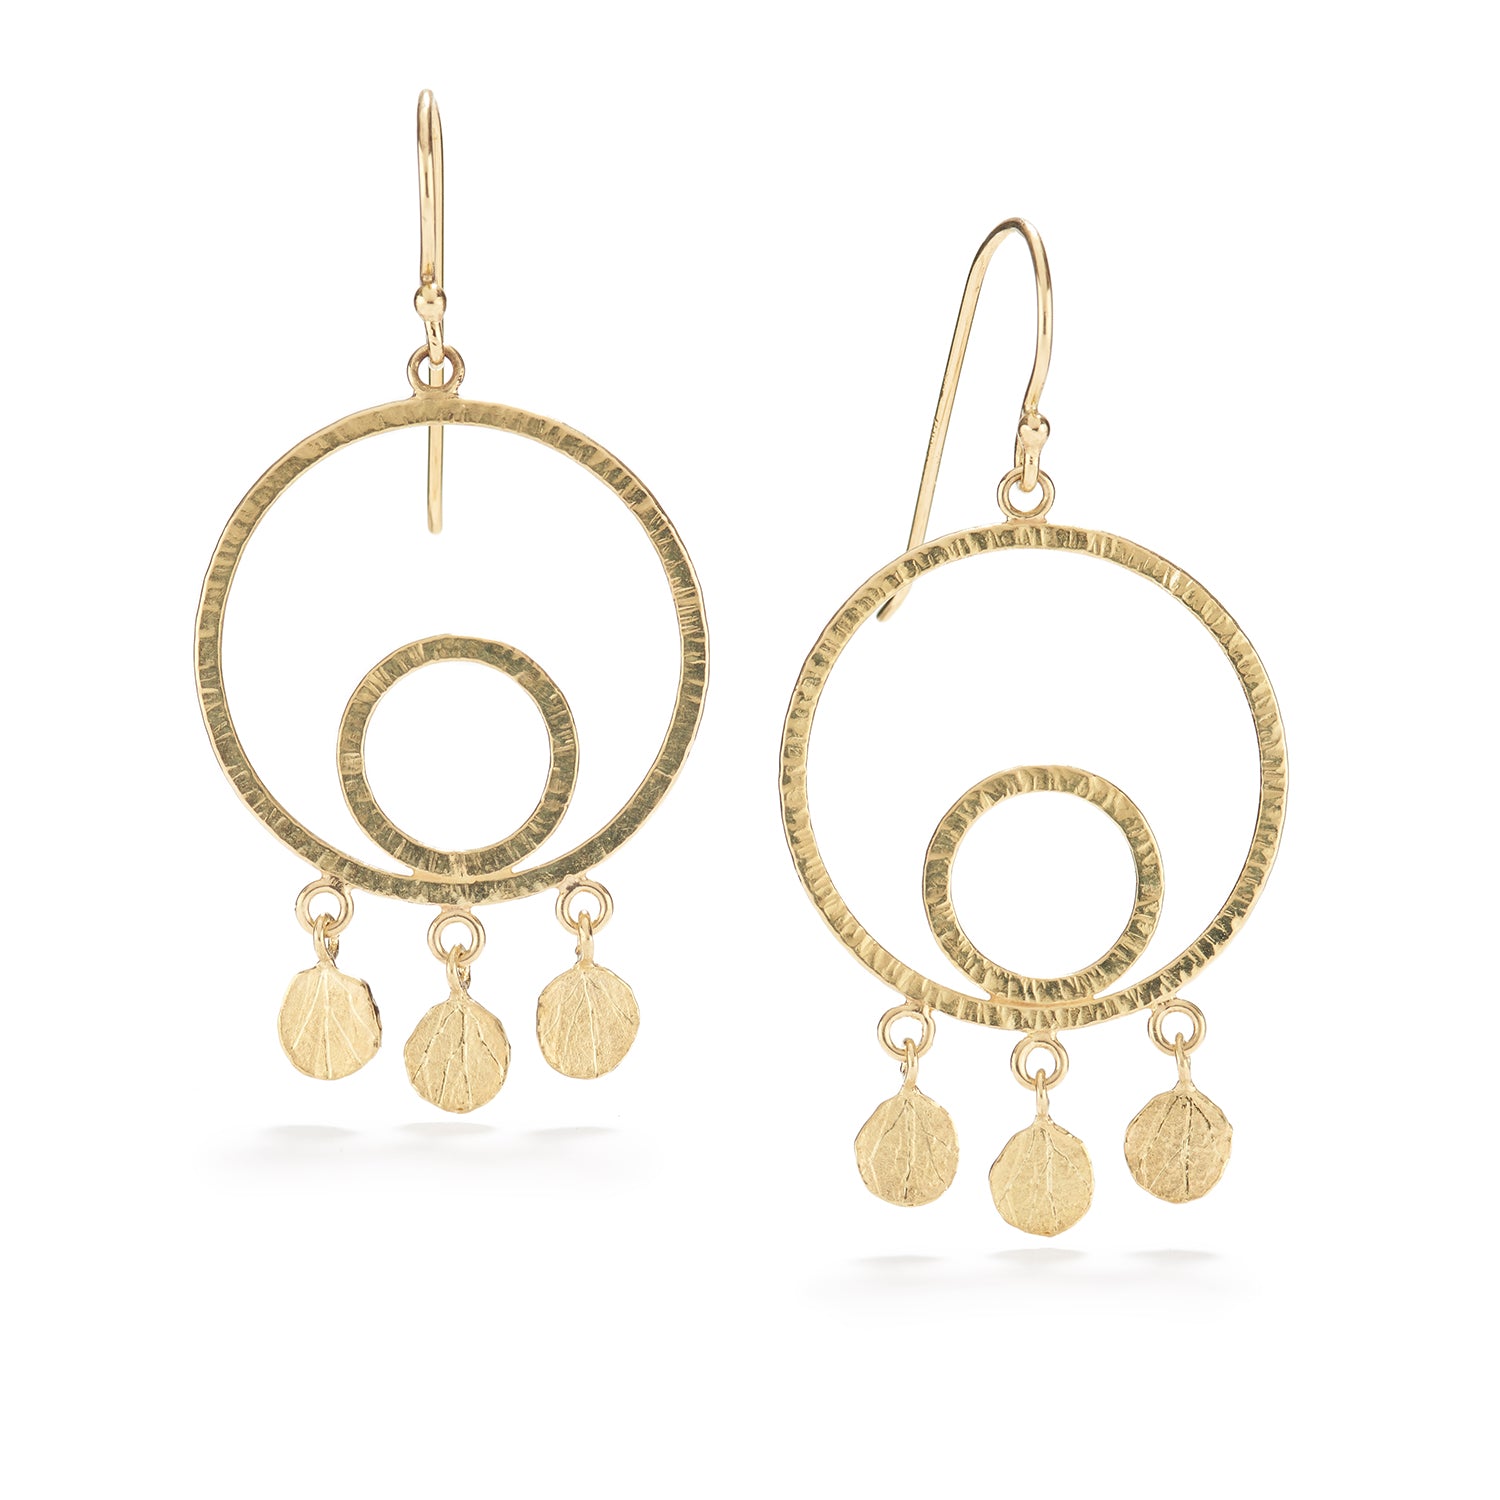 Gold Rounded Earrings with Petal Drops